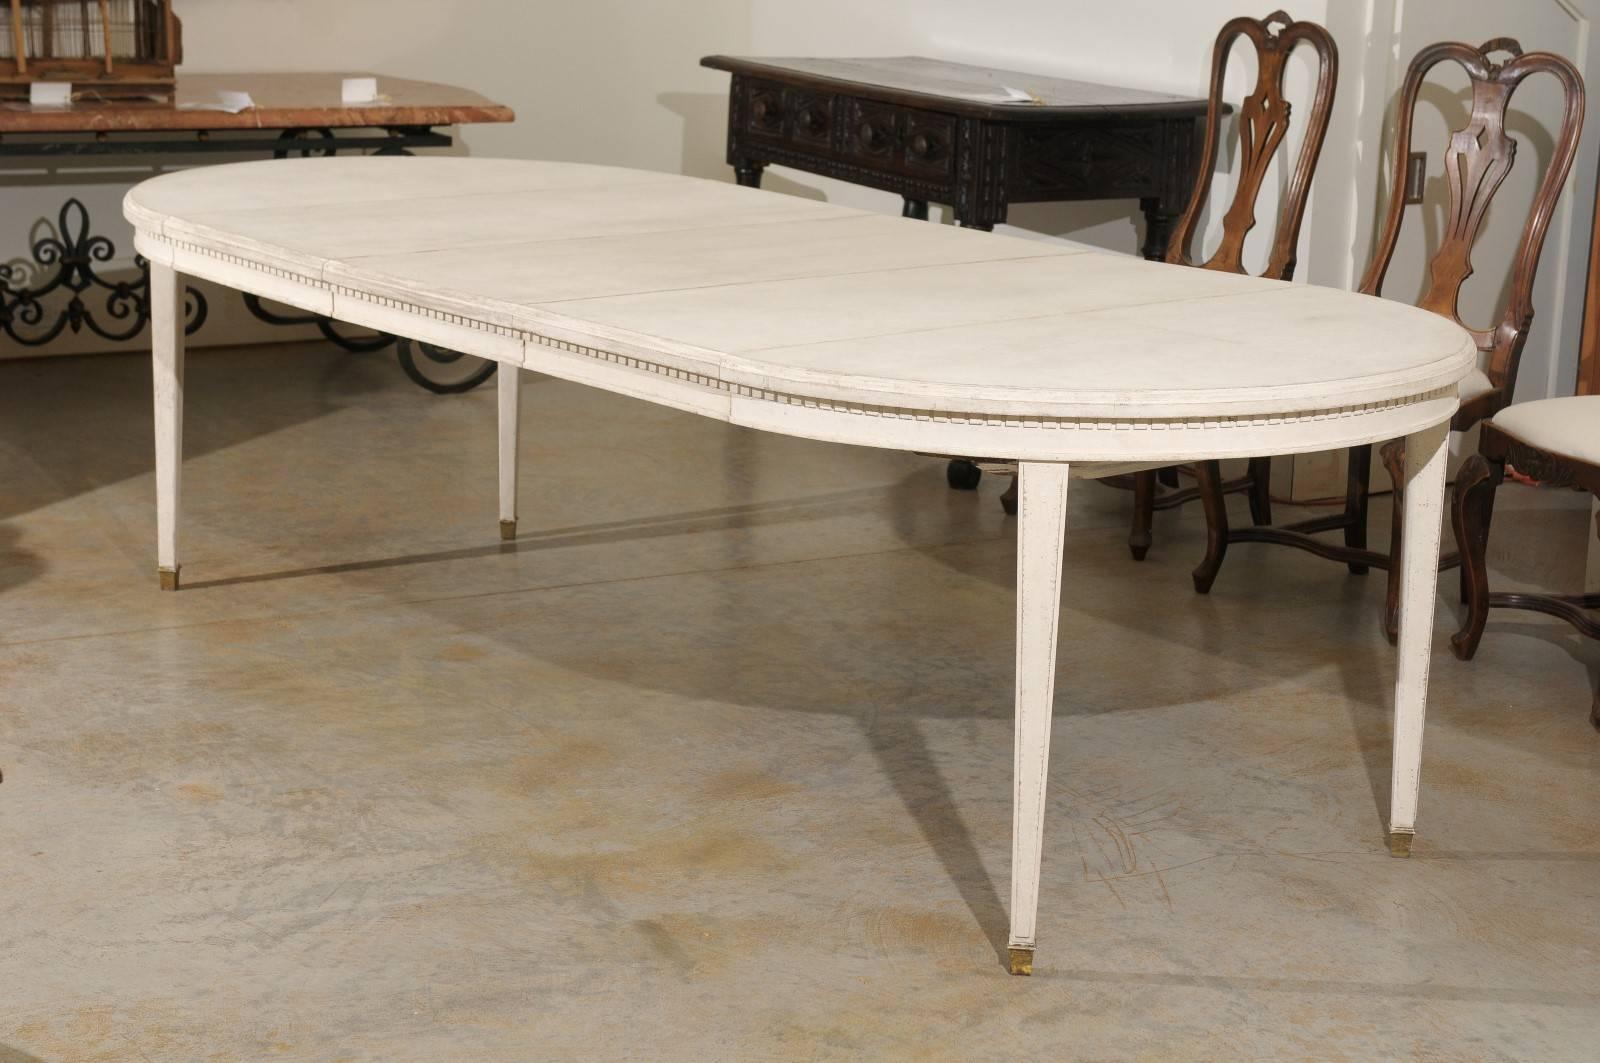 A Swedish Gustavian style painted dining room table with extensions from the early 20th century. This Swedish dining room table circa 1900-1920 features a circular top discreetly adorned with a dentil molding on the apron. Raised on four slightly